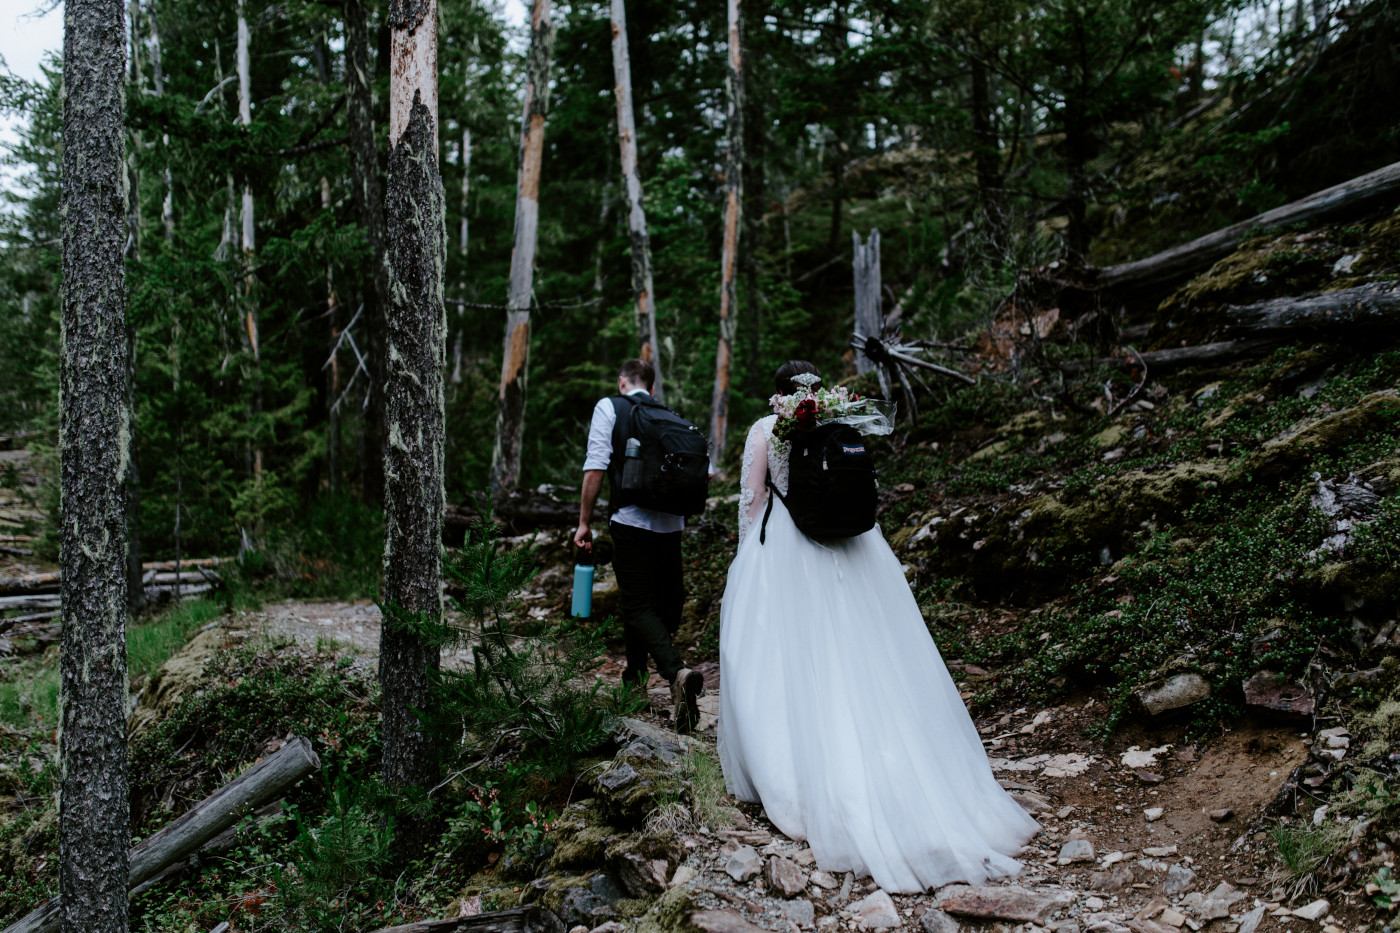 Alex and Elizabeth eat their cake. Elopement photography at North Cascades National Park by Sienna Plus Josh.